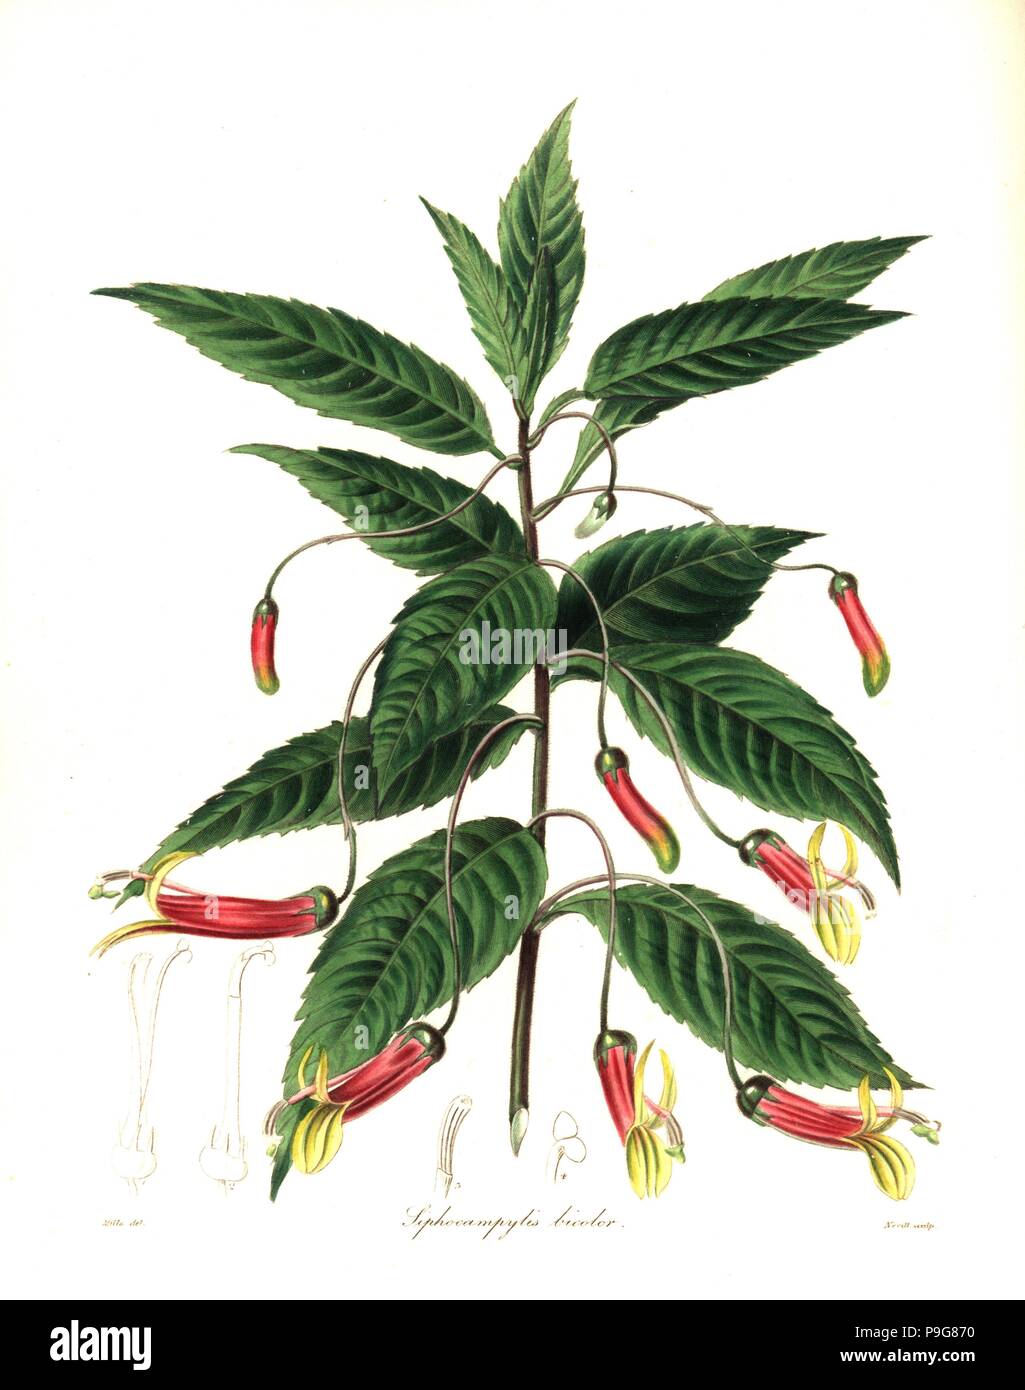 Mexican lobelia, Lobelia laxiflora (Two-coloured siphocampylus, Siphocampylus bicolor). Handcoloured copperplate engraving by S. Nevitt after a botanical illustration by Mills from Benjamin Maund and the Rev. John Stevens Henslow's The Botanist, London, 1836. Stock Photo